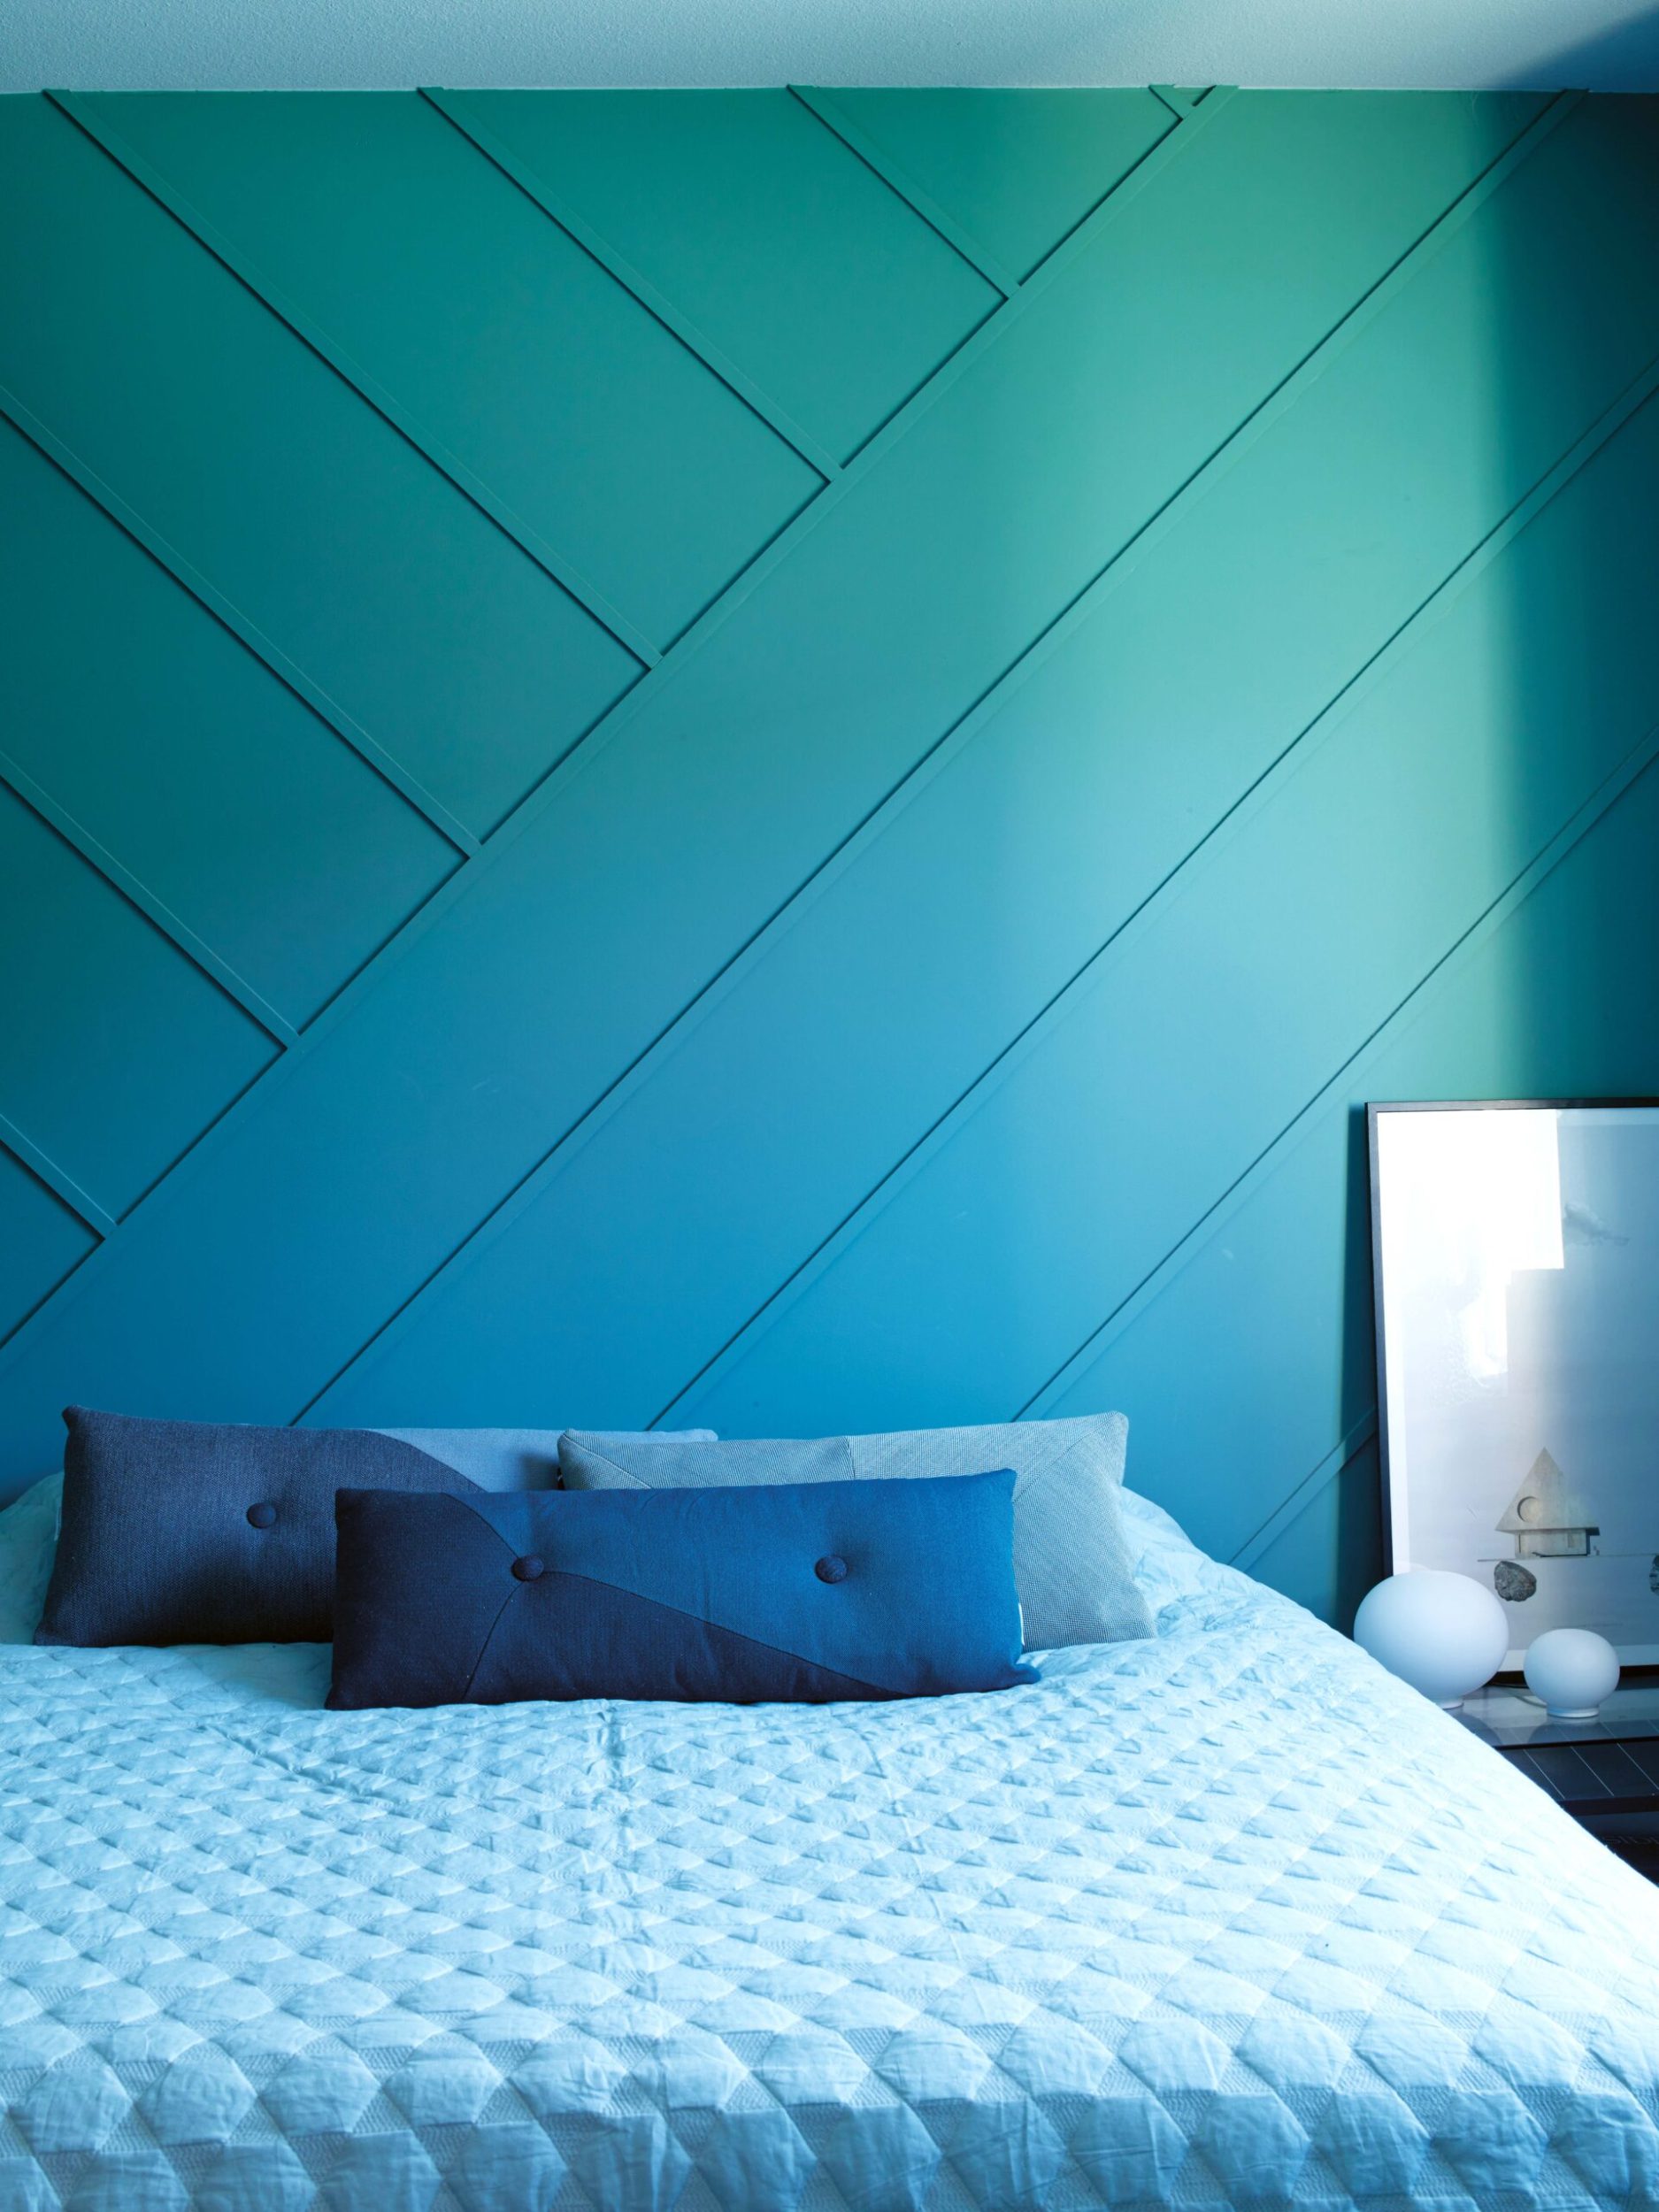 Blue and green bedroom with a blue bedspread